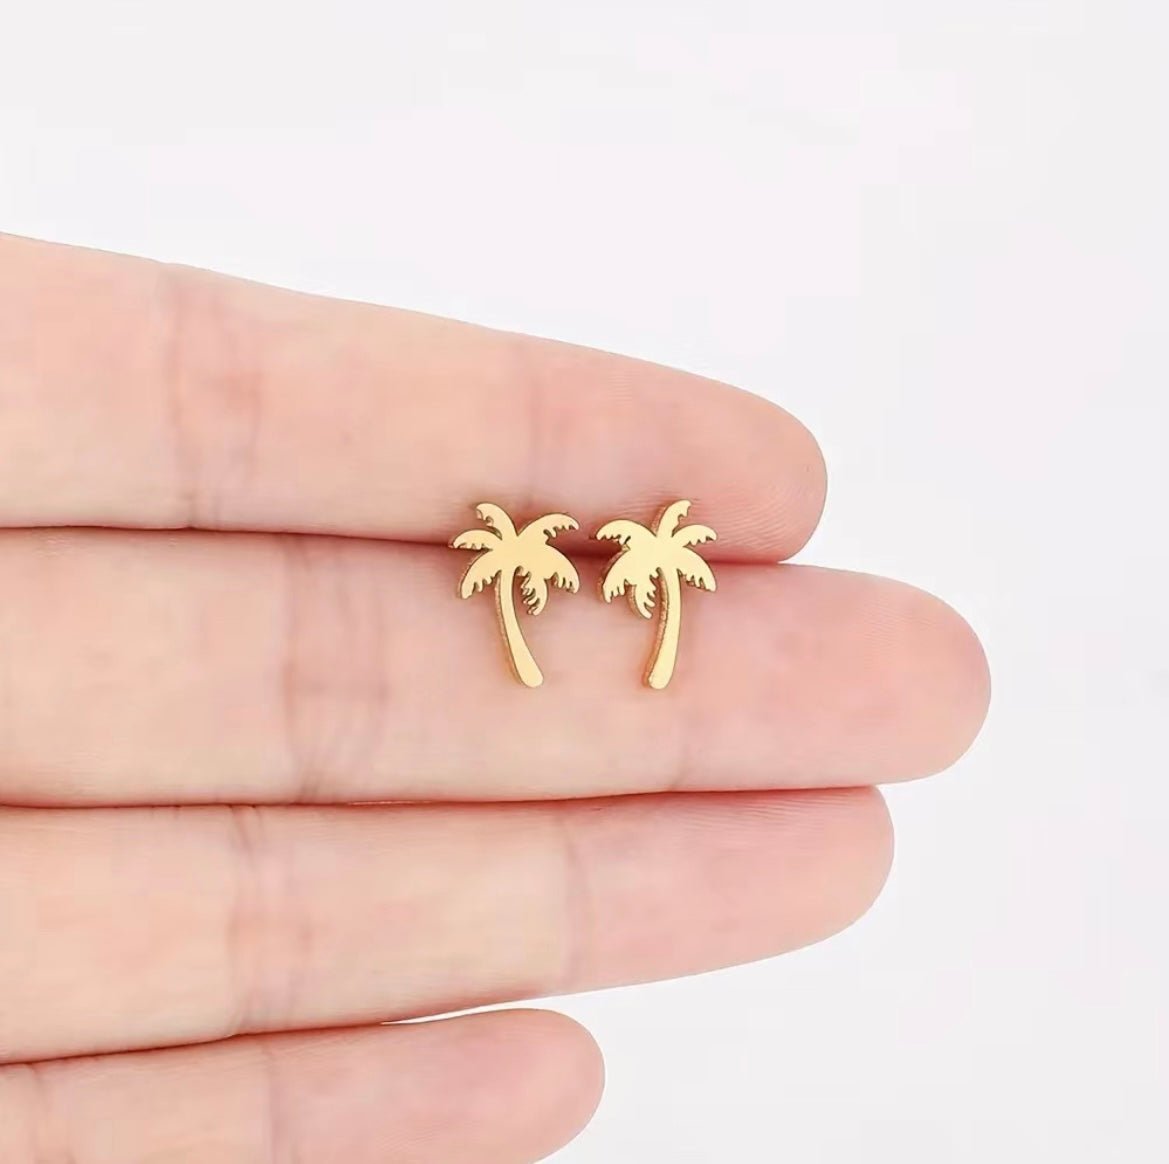 3pc Sterling Silver Palm Tree Gold, Silver, & Black Stud Earrings - A World With You Travel